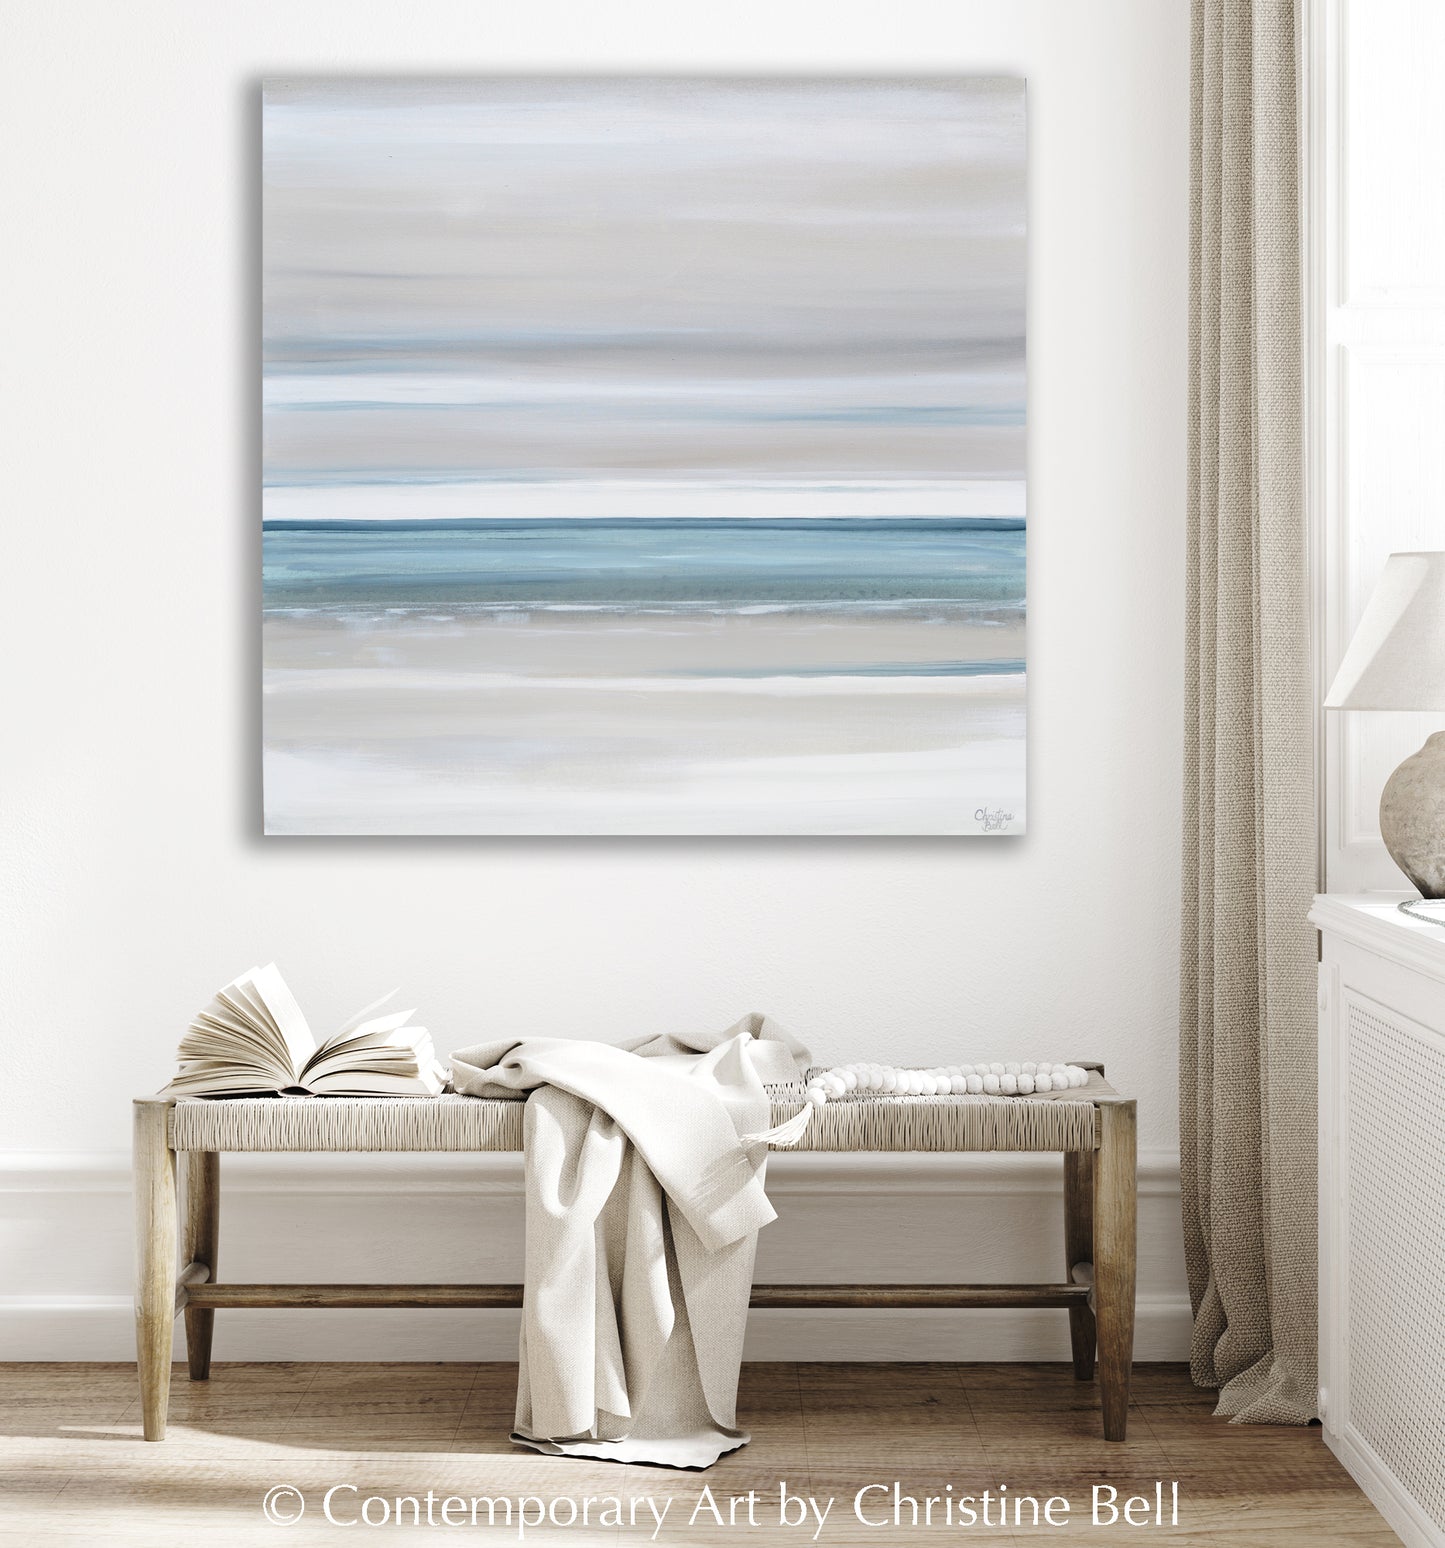 Original fine art abstract painting expressionistic landscape "Your Journey" minimalist neutral beige grey cream white brown framed canvas paintings Artist Christine Bell vertical wall art home decor natural elegant coastal living room design